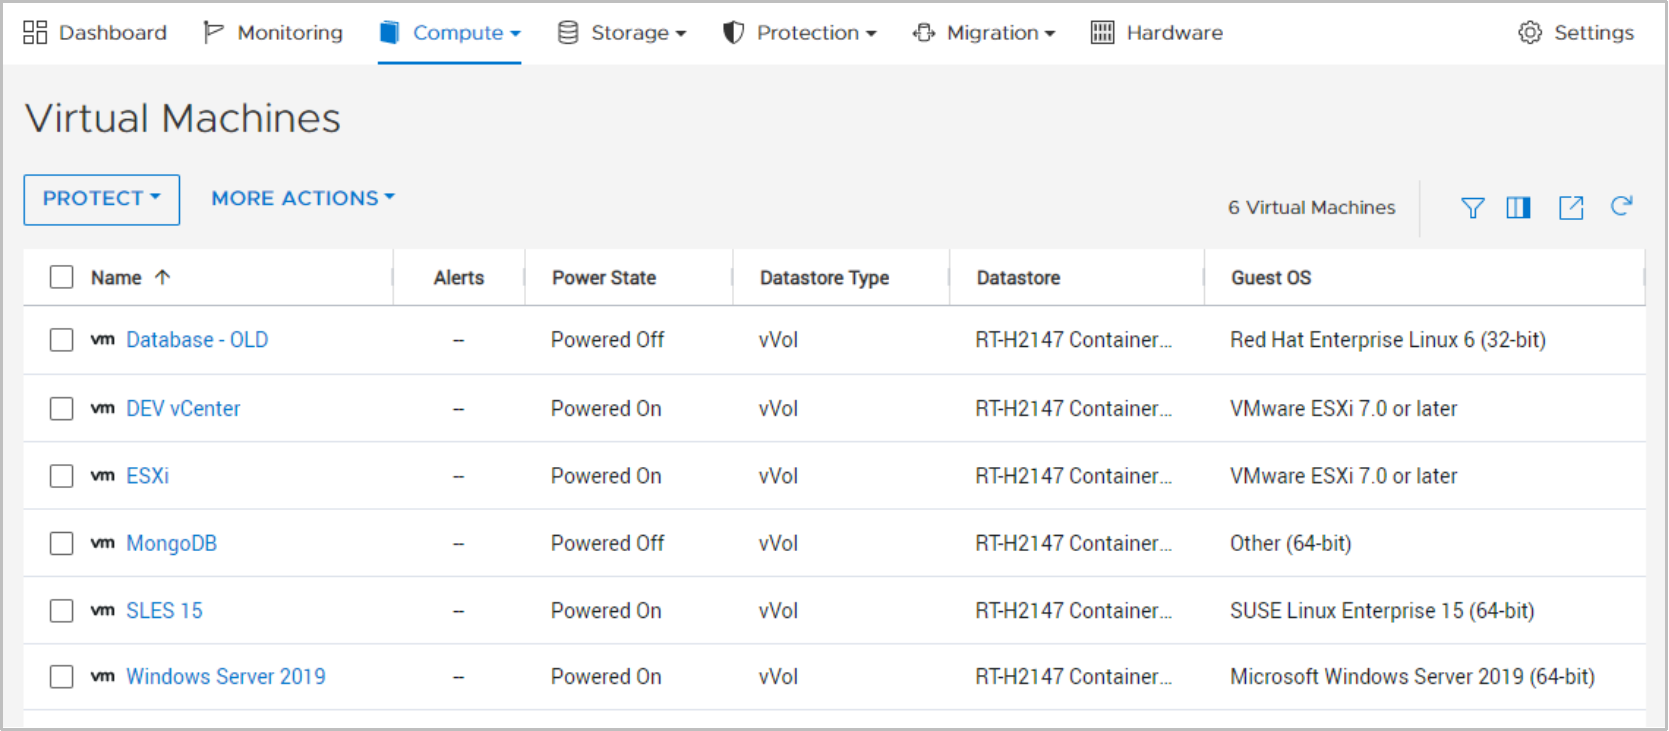 A screenshot of PowerStore Manager showing the list of Virtual Machines along with their status and other details.